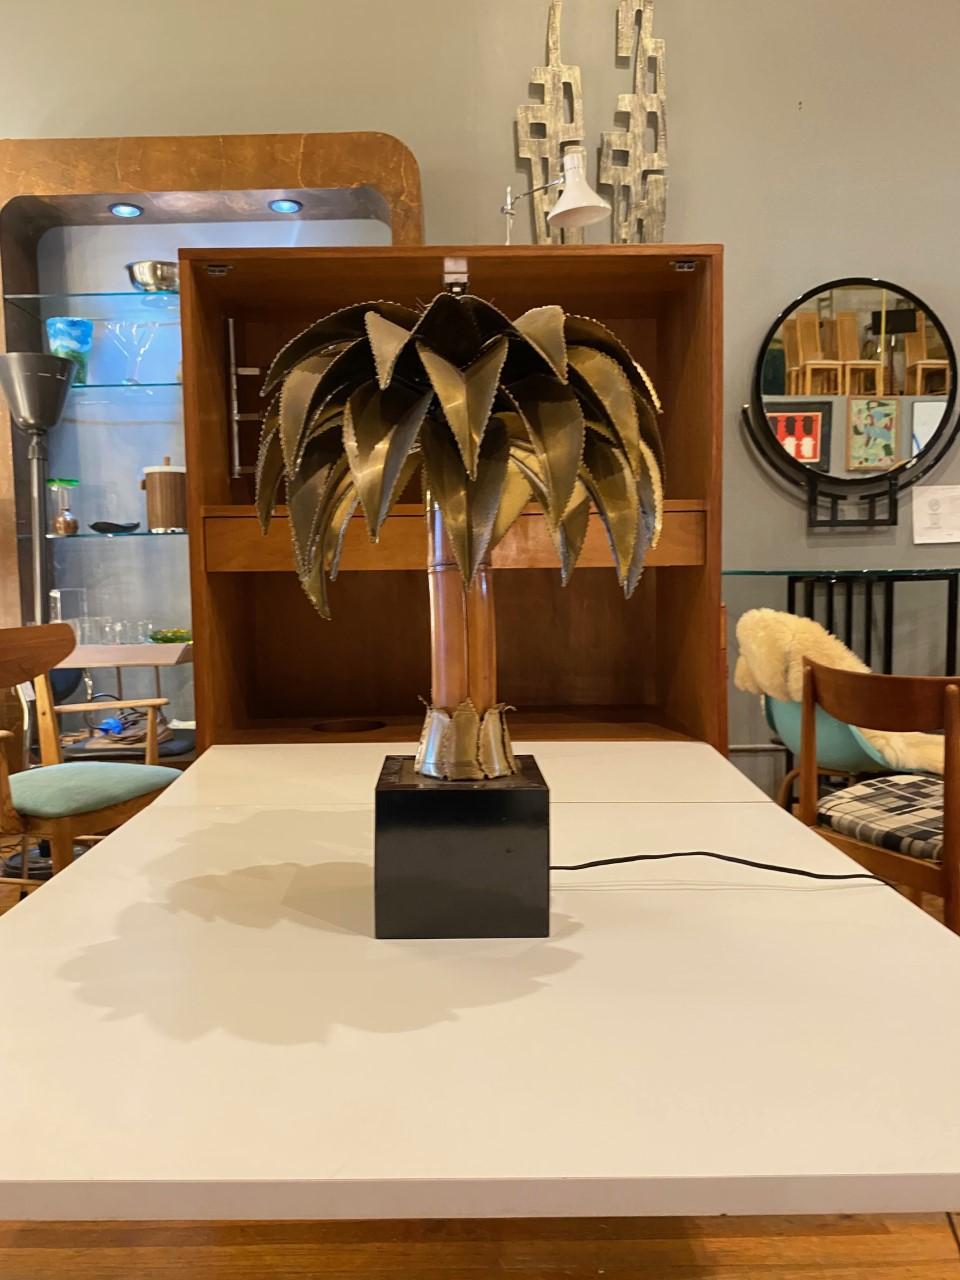 Sculptural and unique palm tree sculpture table lamp by Christian Techoueyres for Maison Jensen. This lamp creates a beautiful impact in your décor and creates atmospheric lighting and visual impact in your interiors. The trunk is palm wood with